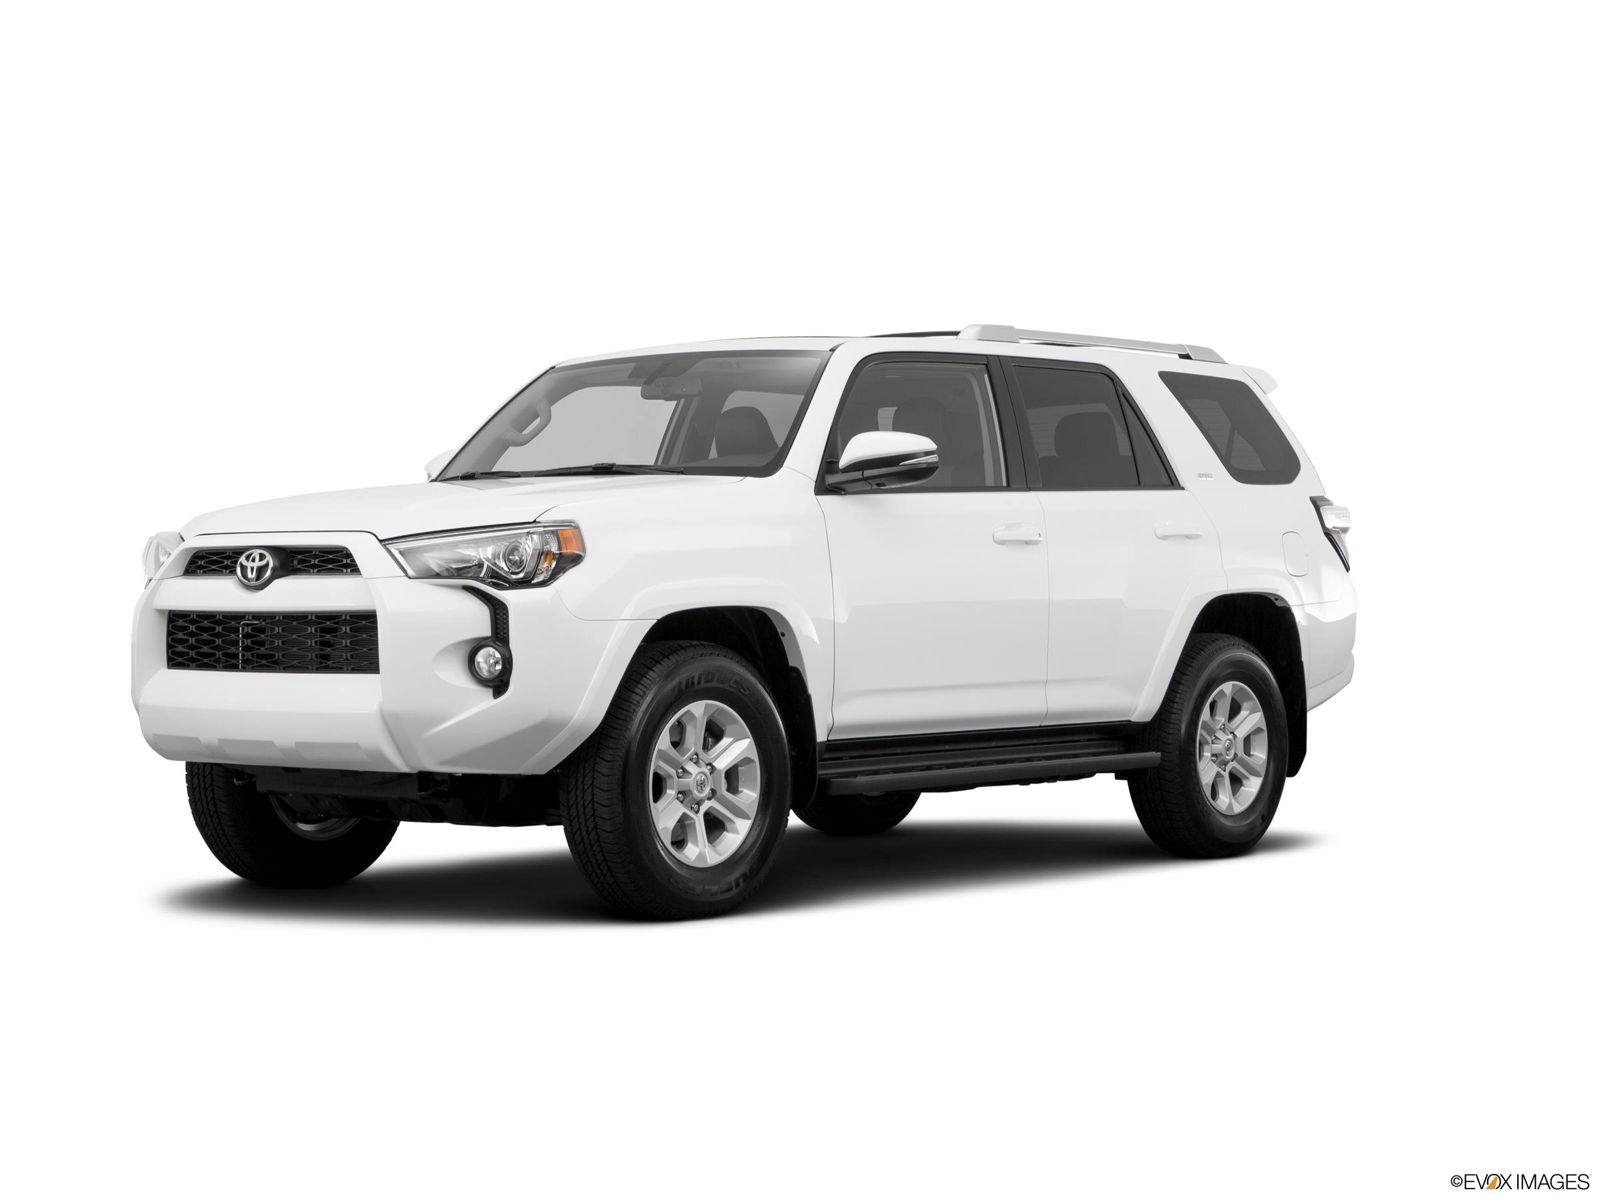 2016 Toyota 4Runner Research, Photos, Specs and Expertise | CarMax